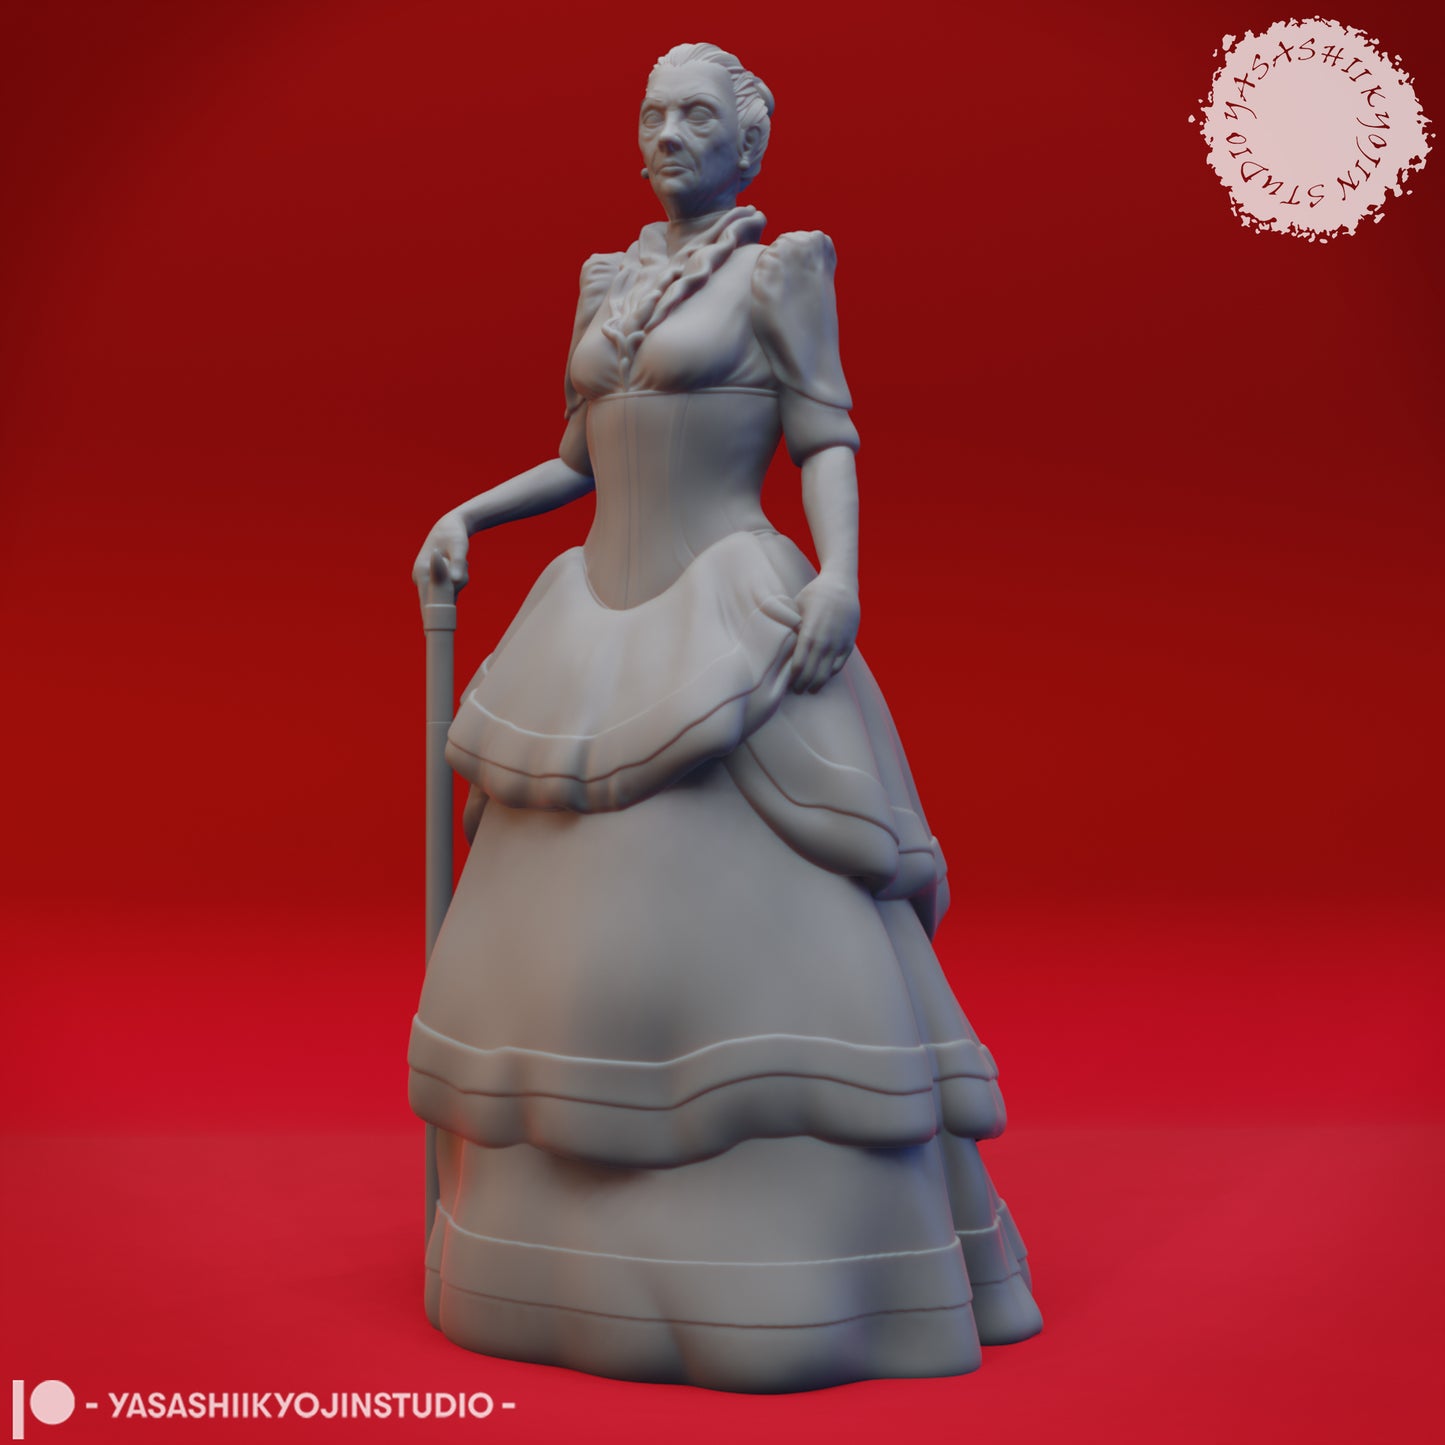 Doppelganger Transformation - Tabletop Miniature (Pre-Supported STL)